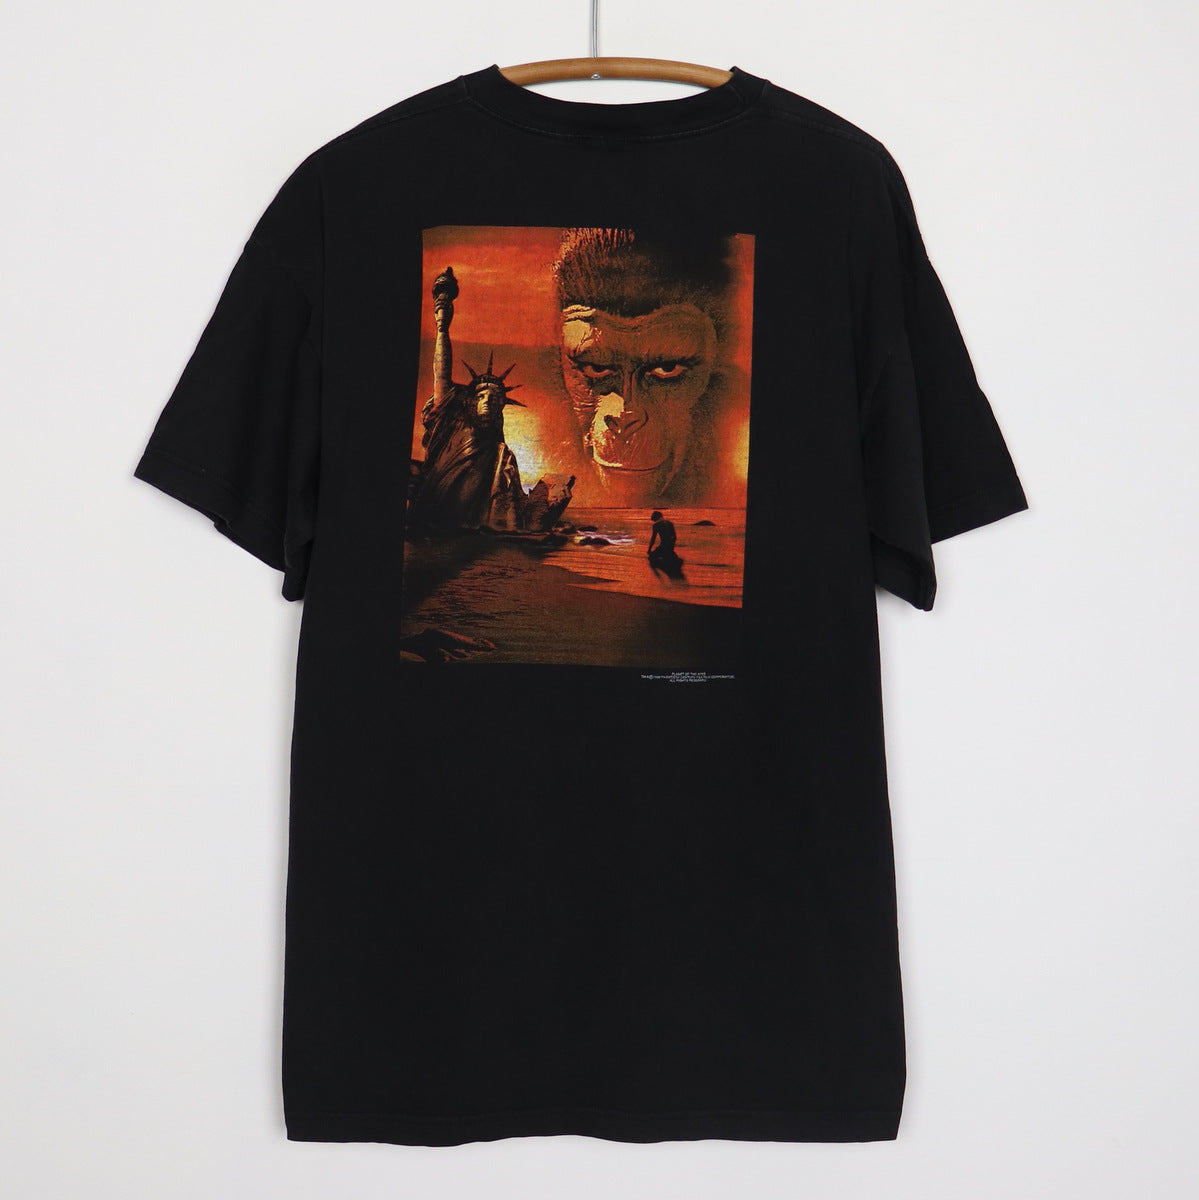 1998 Planet Of The Apes Movie Promo Shirt